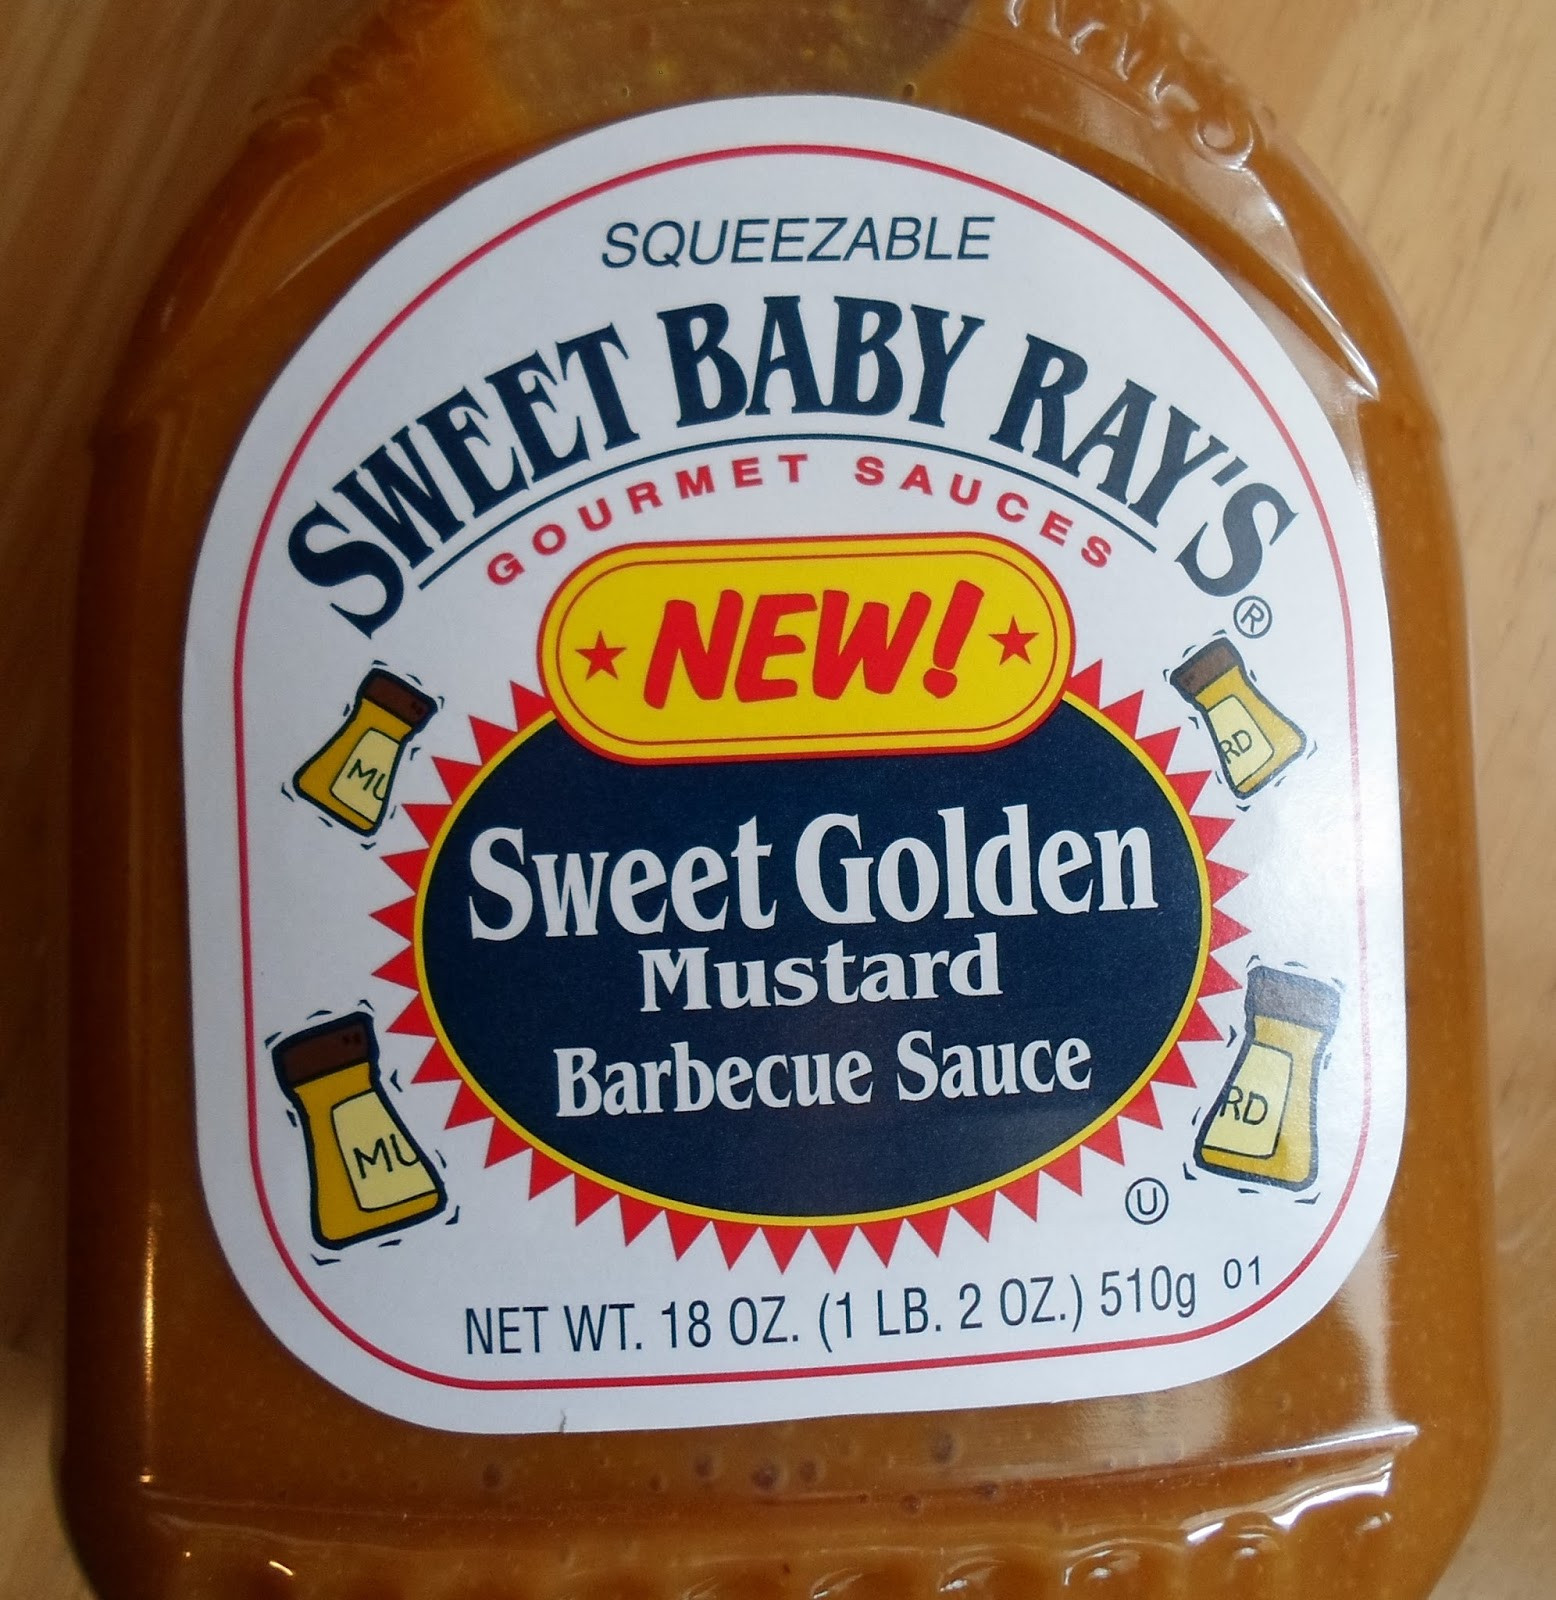 Sweet Baby Ray Bbq Sauce Ingredients
 Happier Than A Pig In Mud Two Ingre nt Sweet Baby Ray s